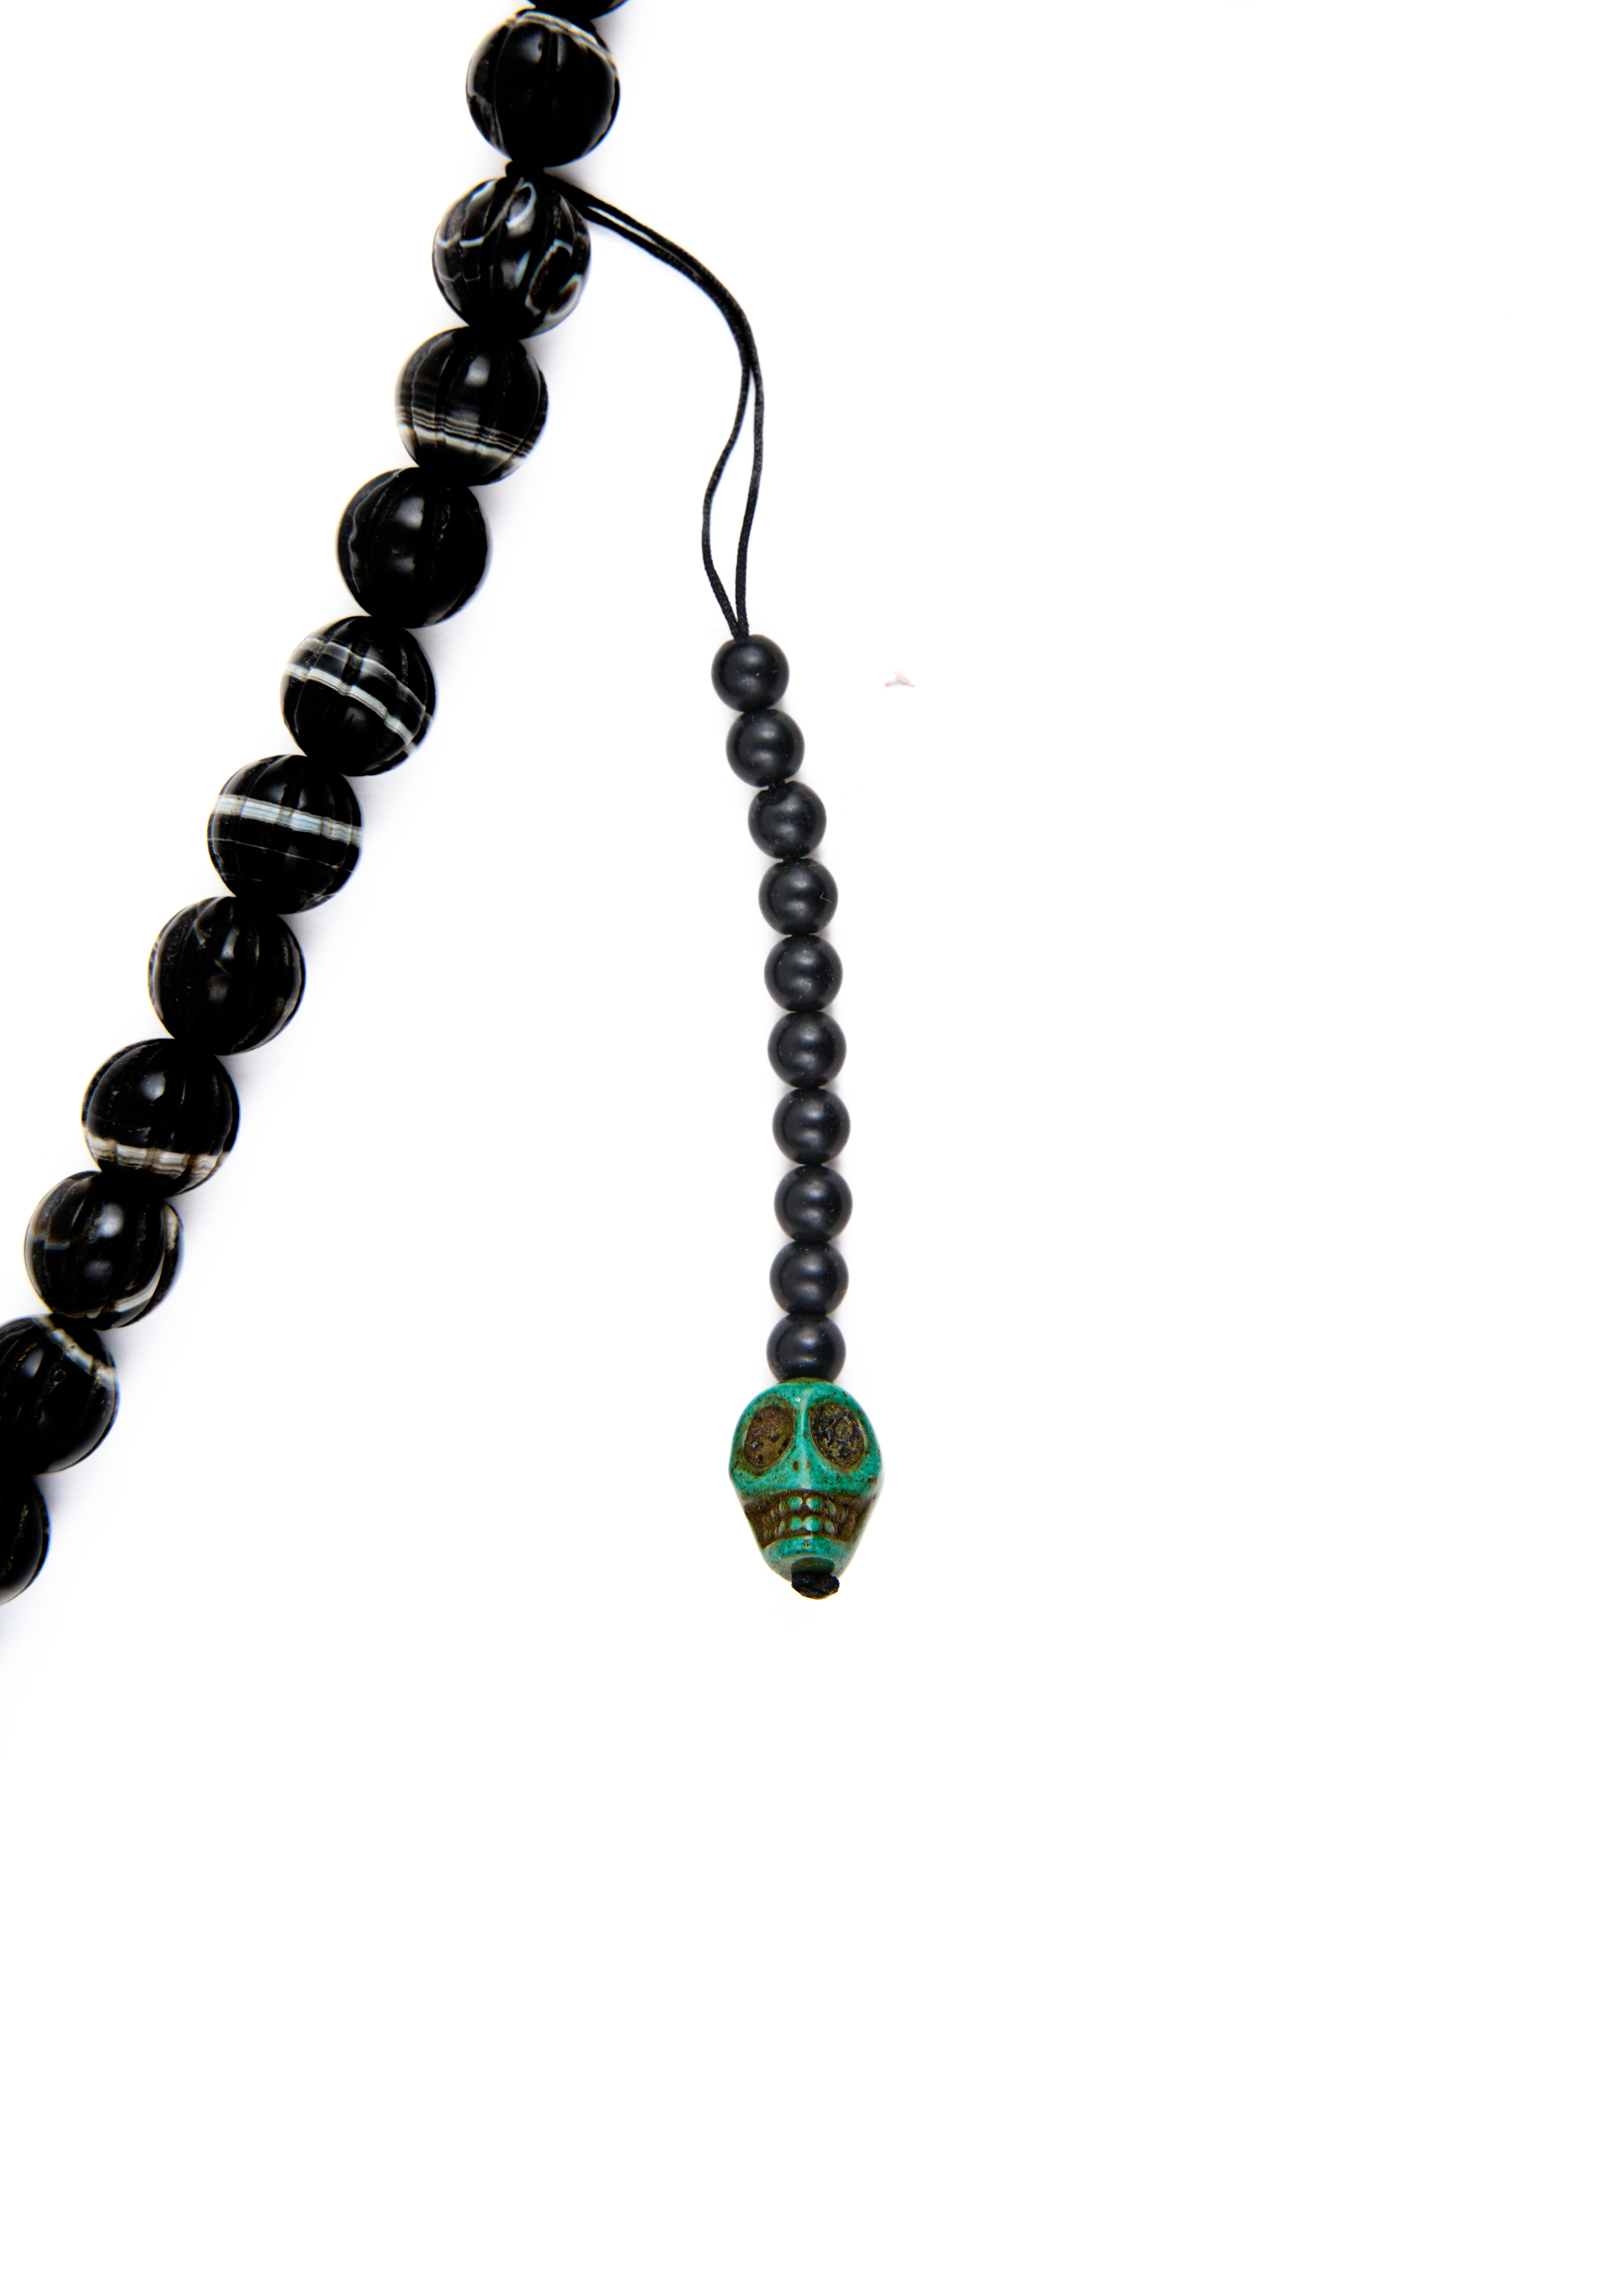 A BANDED AGATE BEAD NECKALCE WITH TIBETAN BRONZE ATTACHMENTS - Image 4 of 5